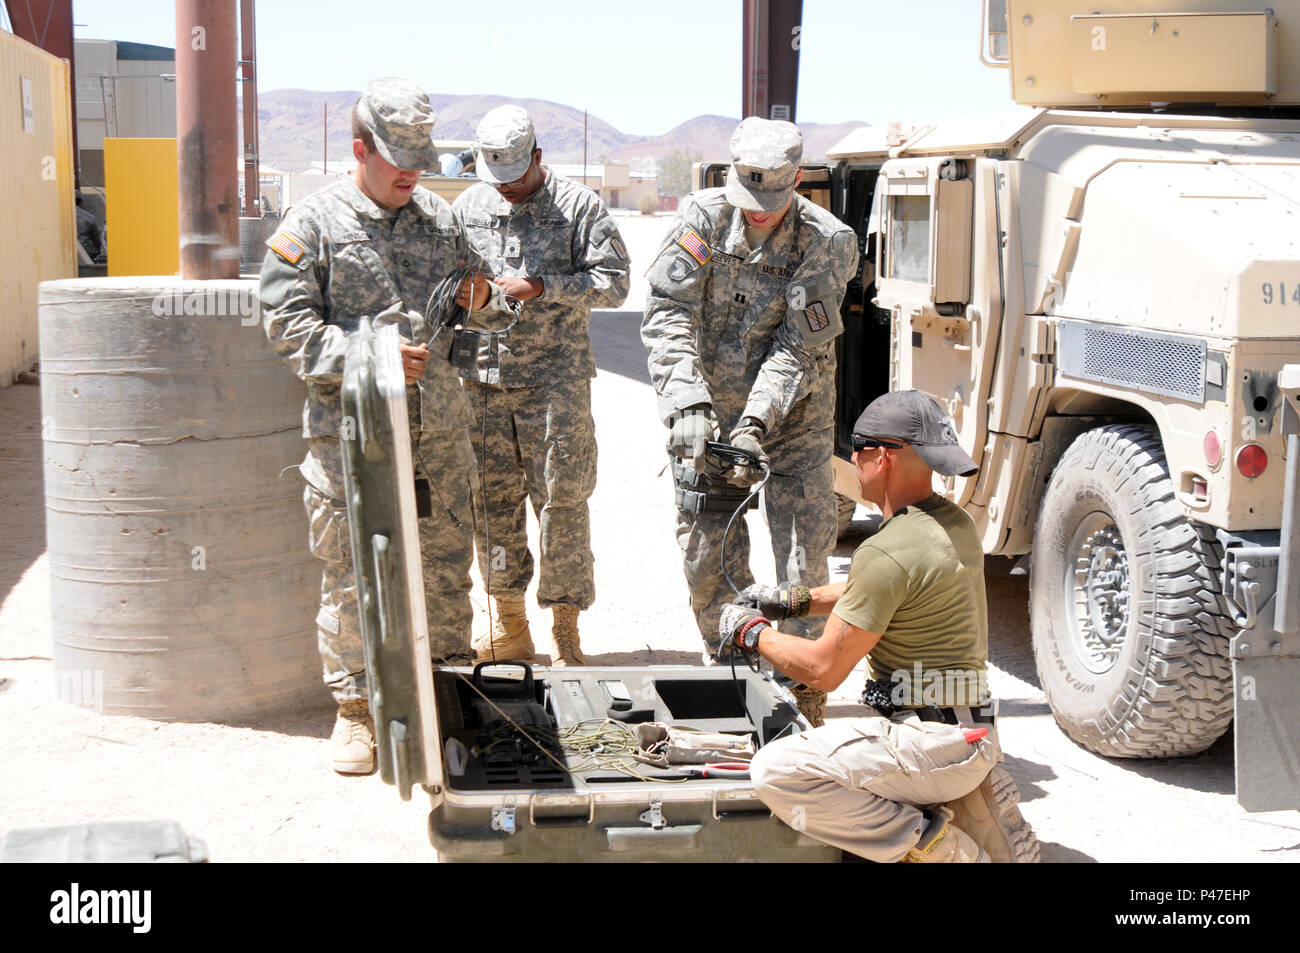 North Carolina Army National Guard soldiers assigned to the 630th Combat Sustainment Support Battalion, turn in Multiple Integrated Laser Engagement Systems (MILES) at the Rotational Unit Bivouac Area during the 16-07 National Training Center rotation at Fort Irwin, California on June 22, 2016. MILES are mounted onto military vehicles and personnel providing a realistic battlefield environment by simulating damage sustained to personnel and vehicles during force-on-force training exercises to enhance soldiers’ individual and collective training.   The NTC is a training facility designed to sim Stock Photo